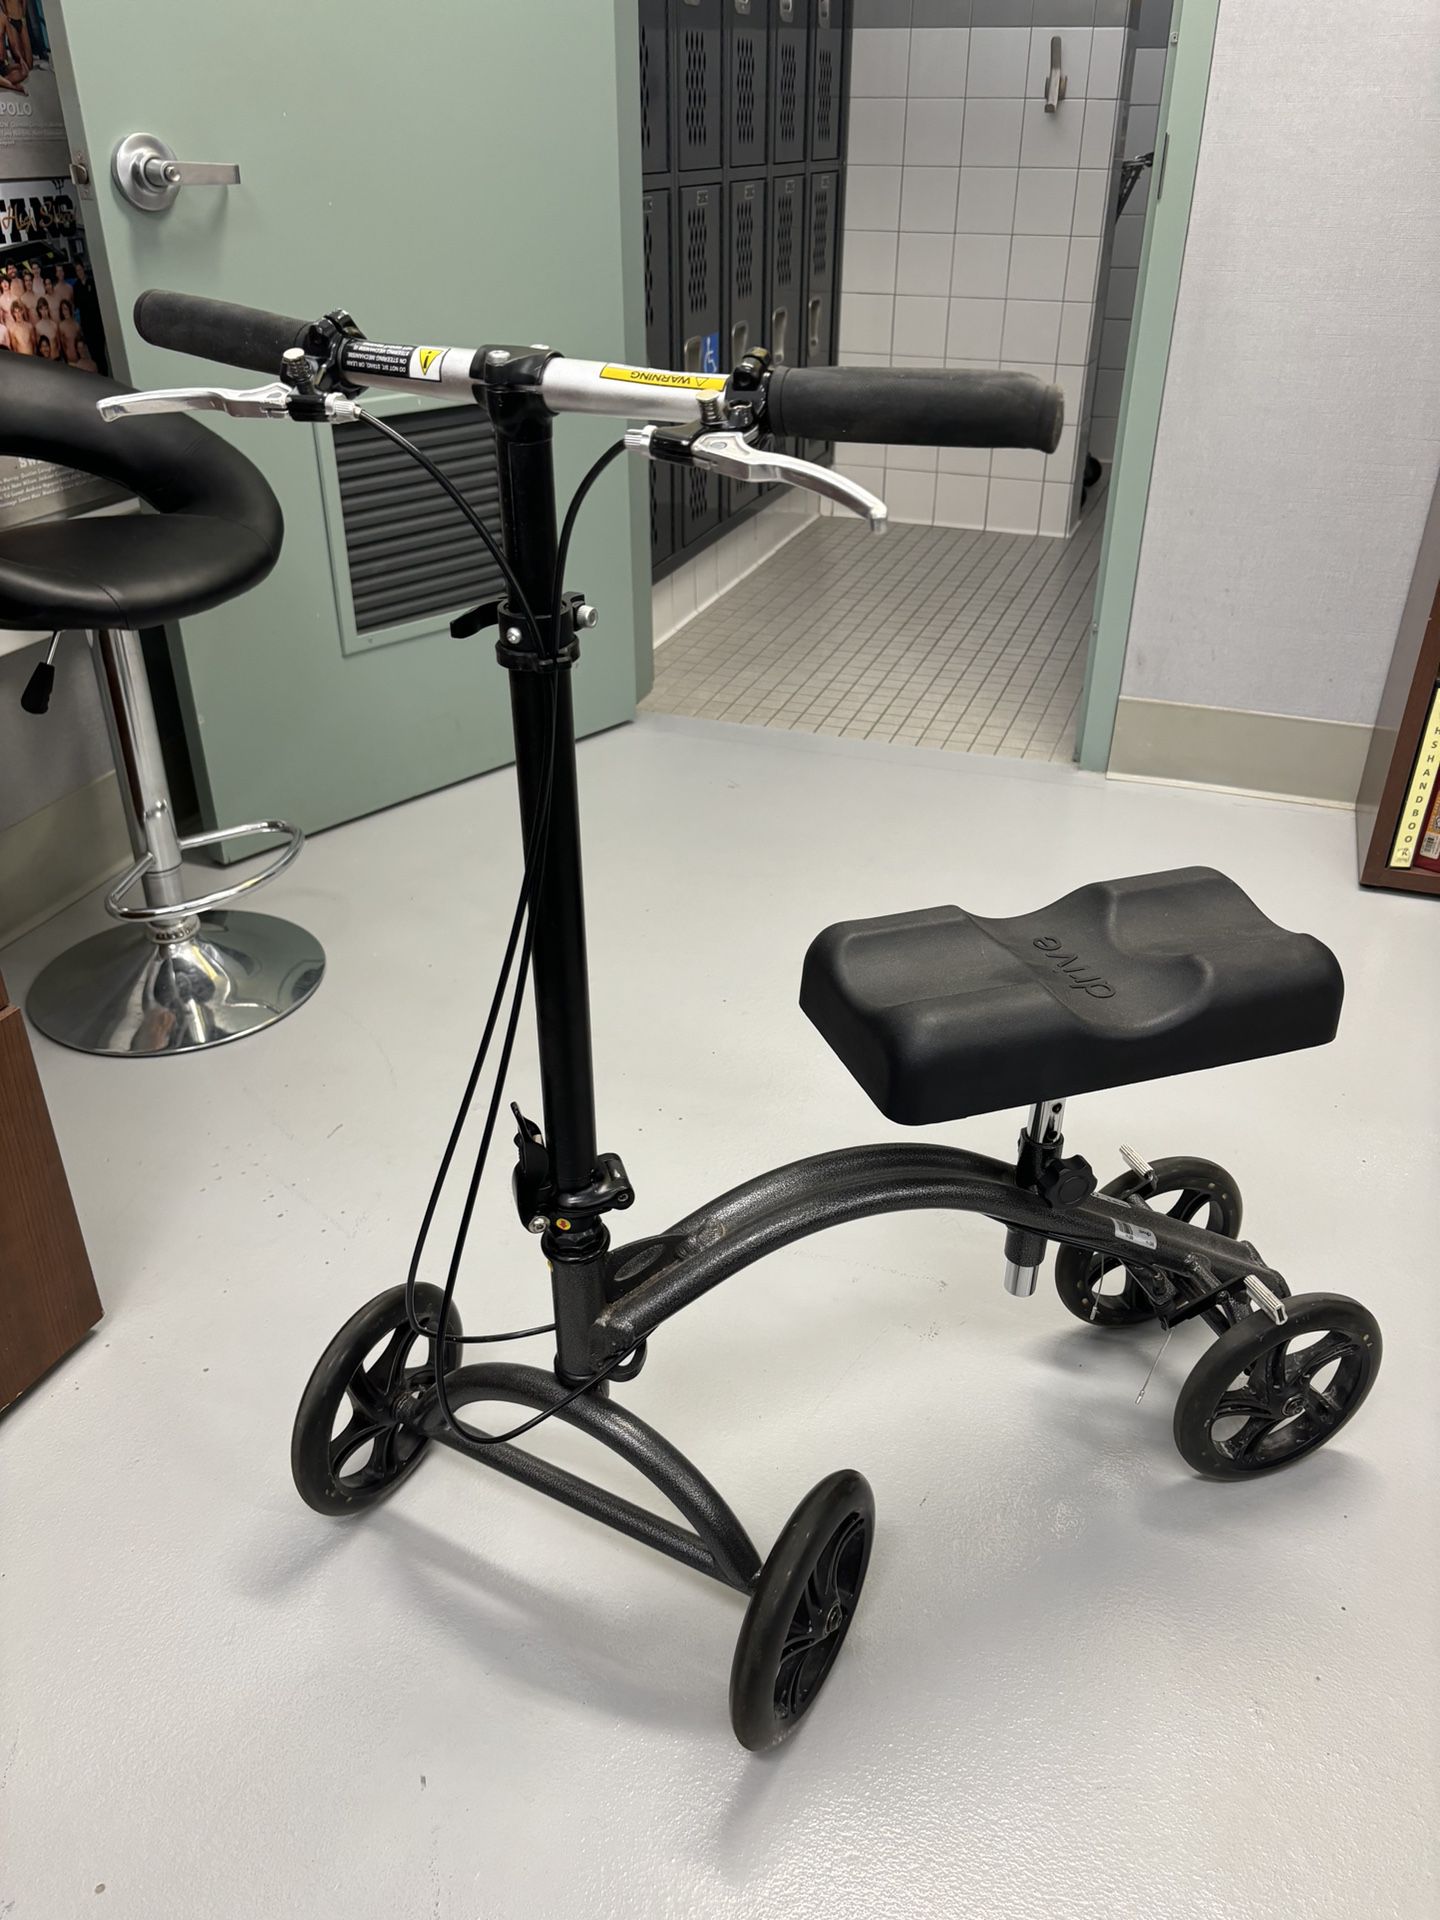 Scooter with Double brakes. Easily folds down for transport. $125